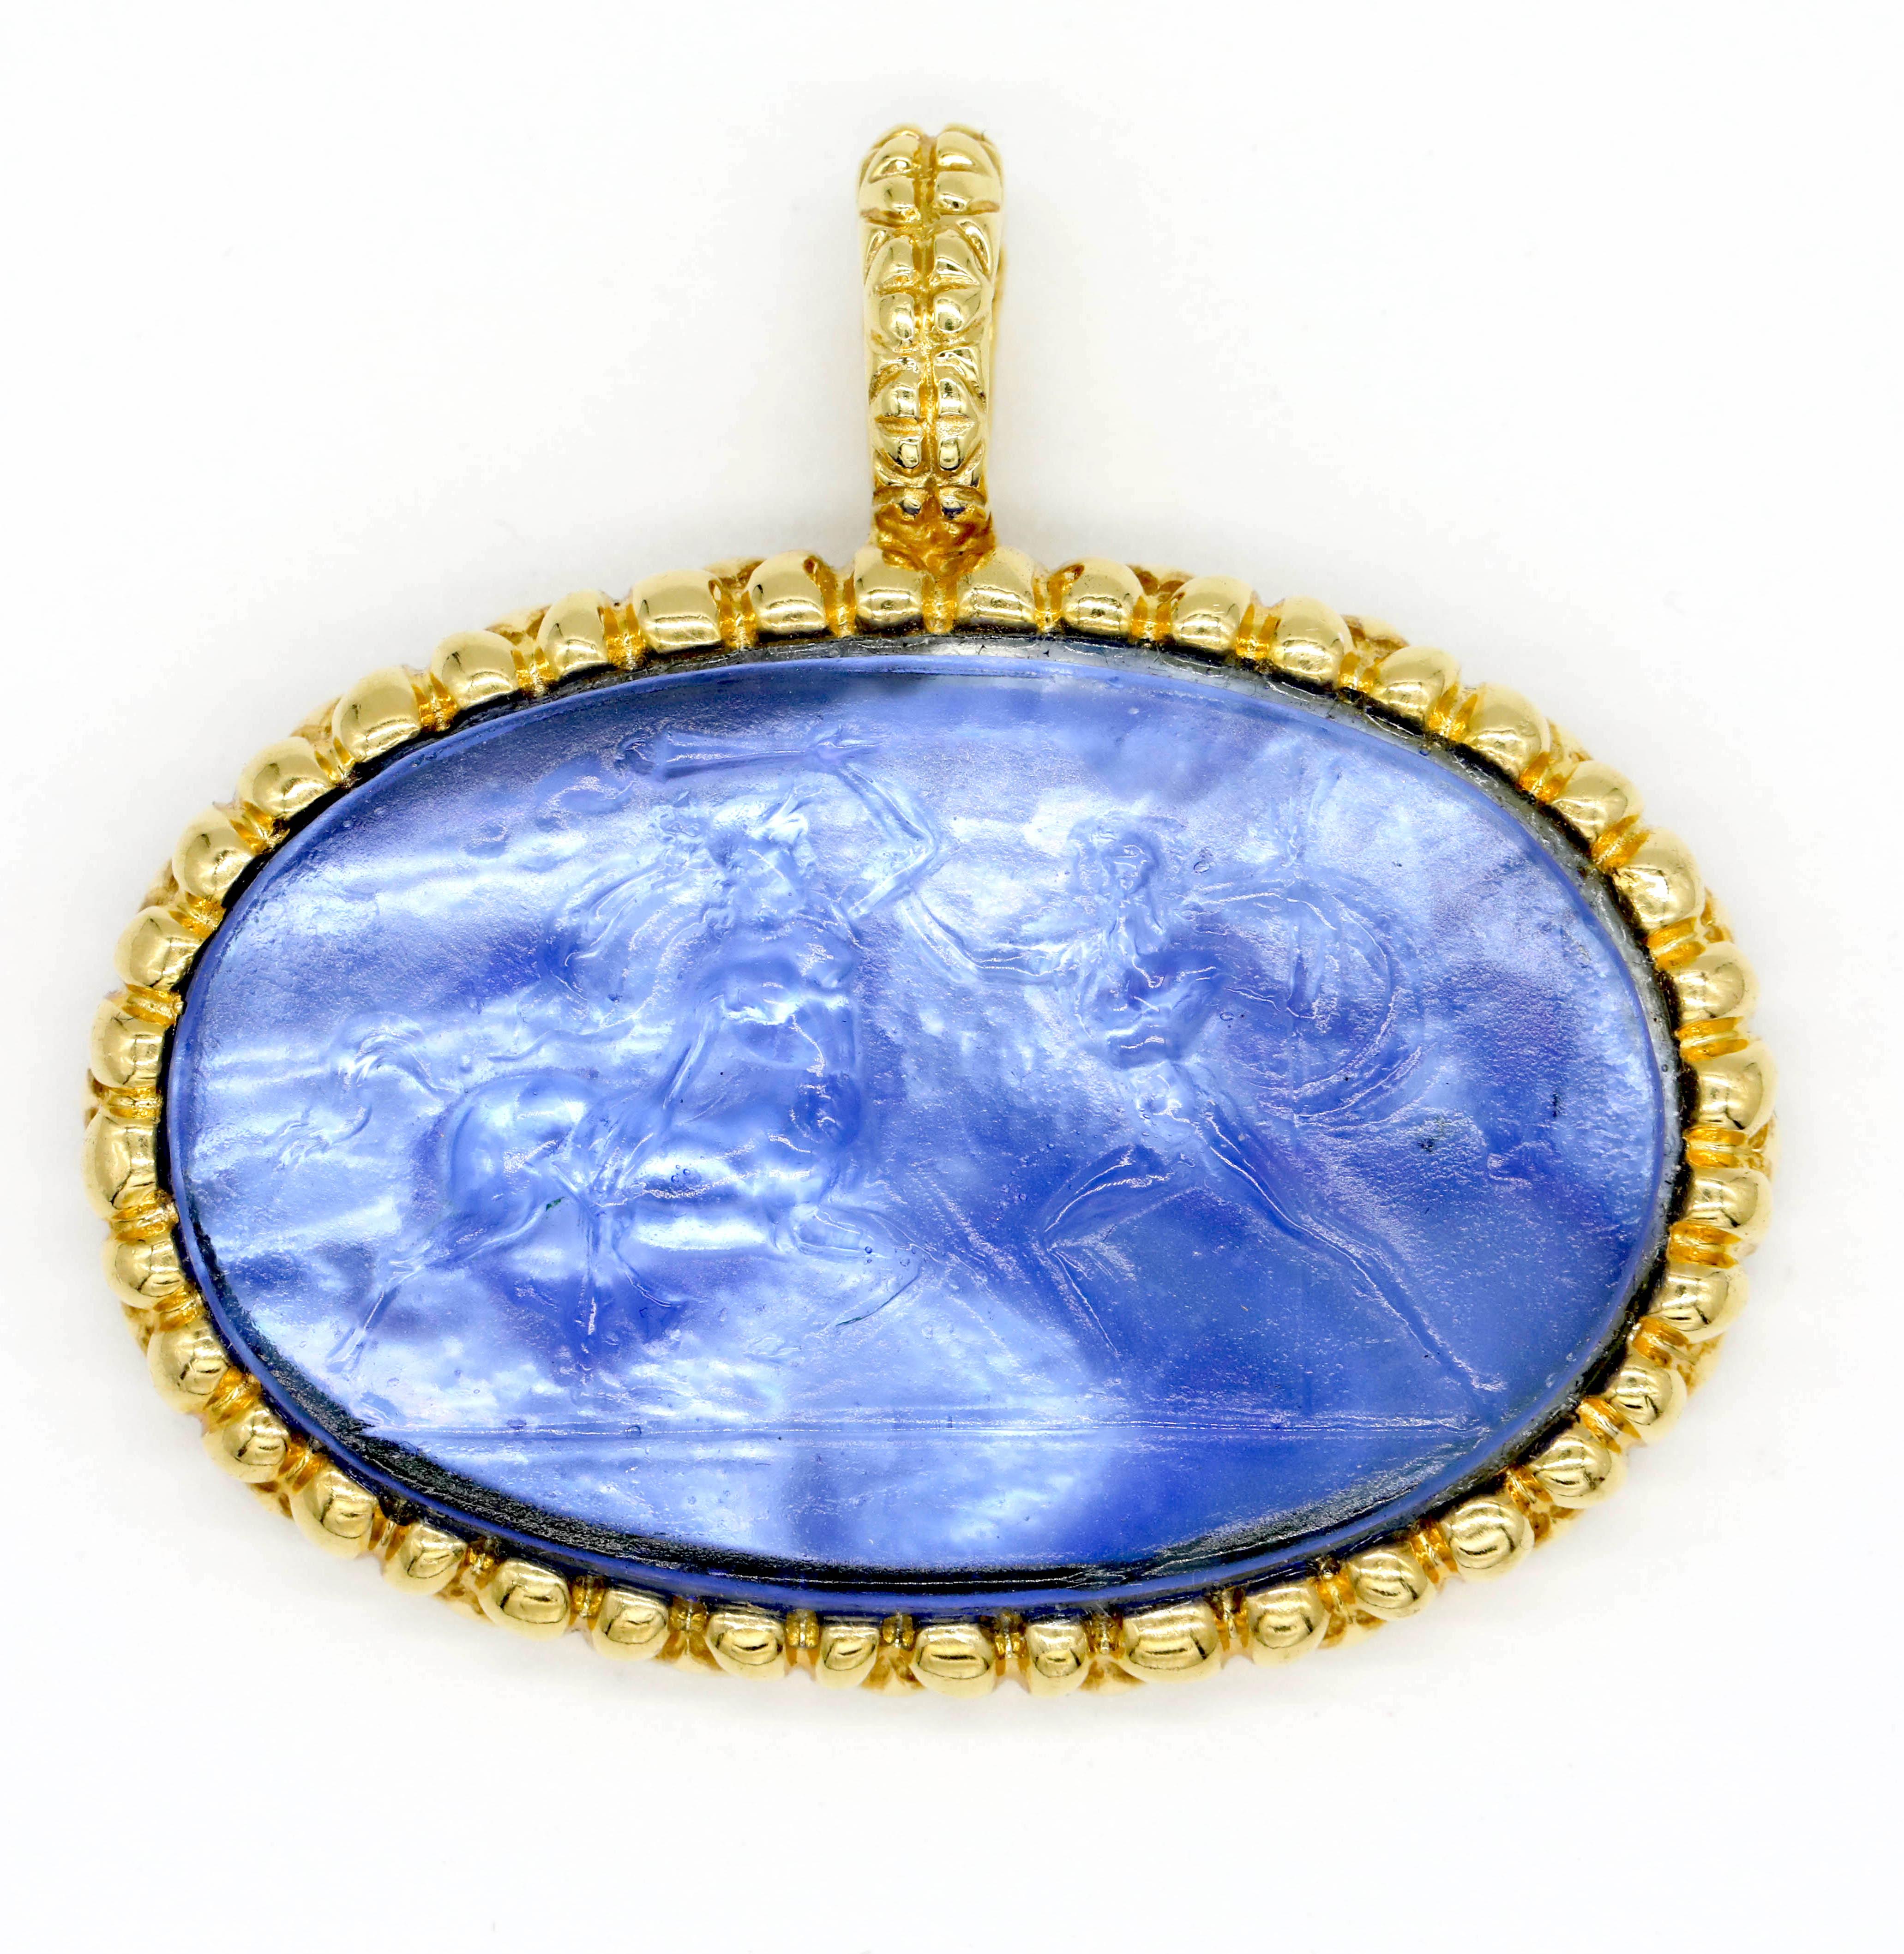 New Victorian Purple Oval Italian Murano Glass Carved Intaglio Pendant 18k Yellow Gold

A cameo, an intaglio is created by carving below the surface to produce an image in relief, with the purpose of pressing into sealing wax. Intaglios were often